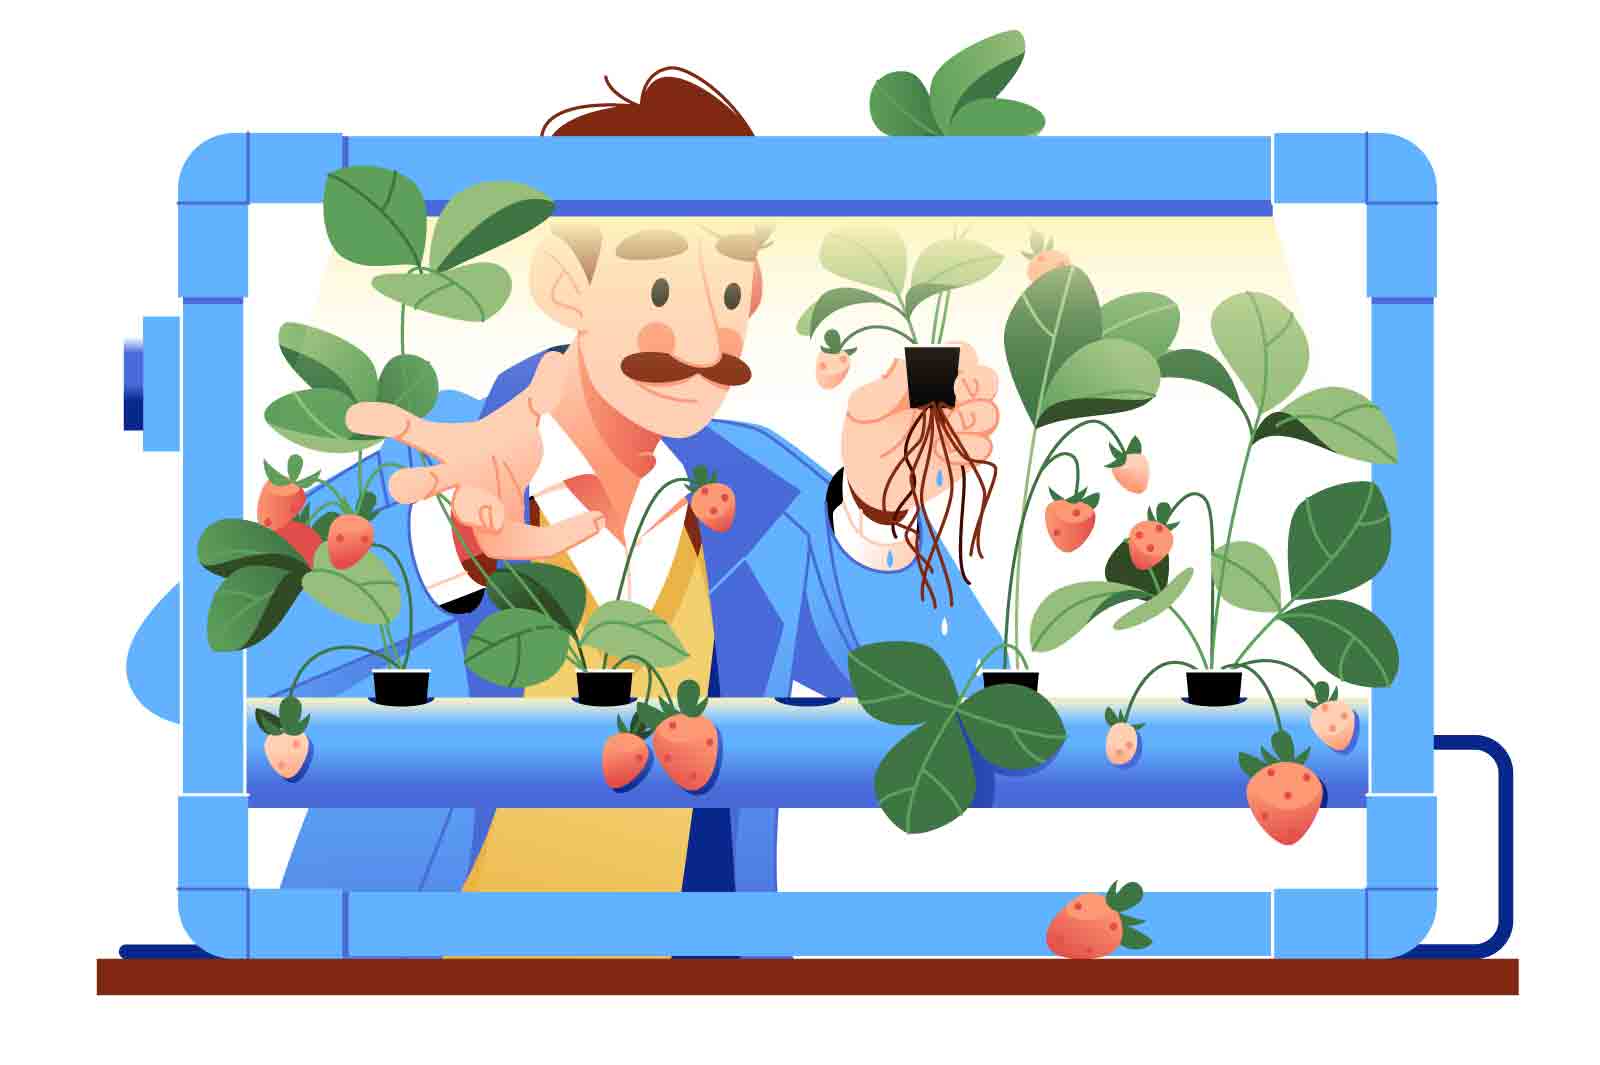 Hydroponics technology for plants growing, vector illustration. A man takes care of strawberries on an artificial farm built on hydroponics technology